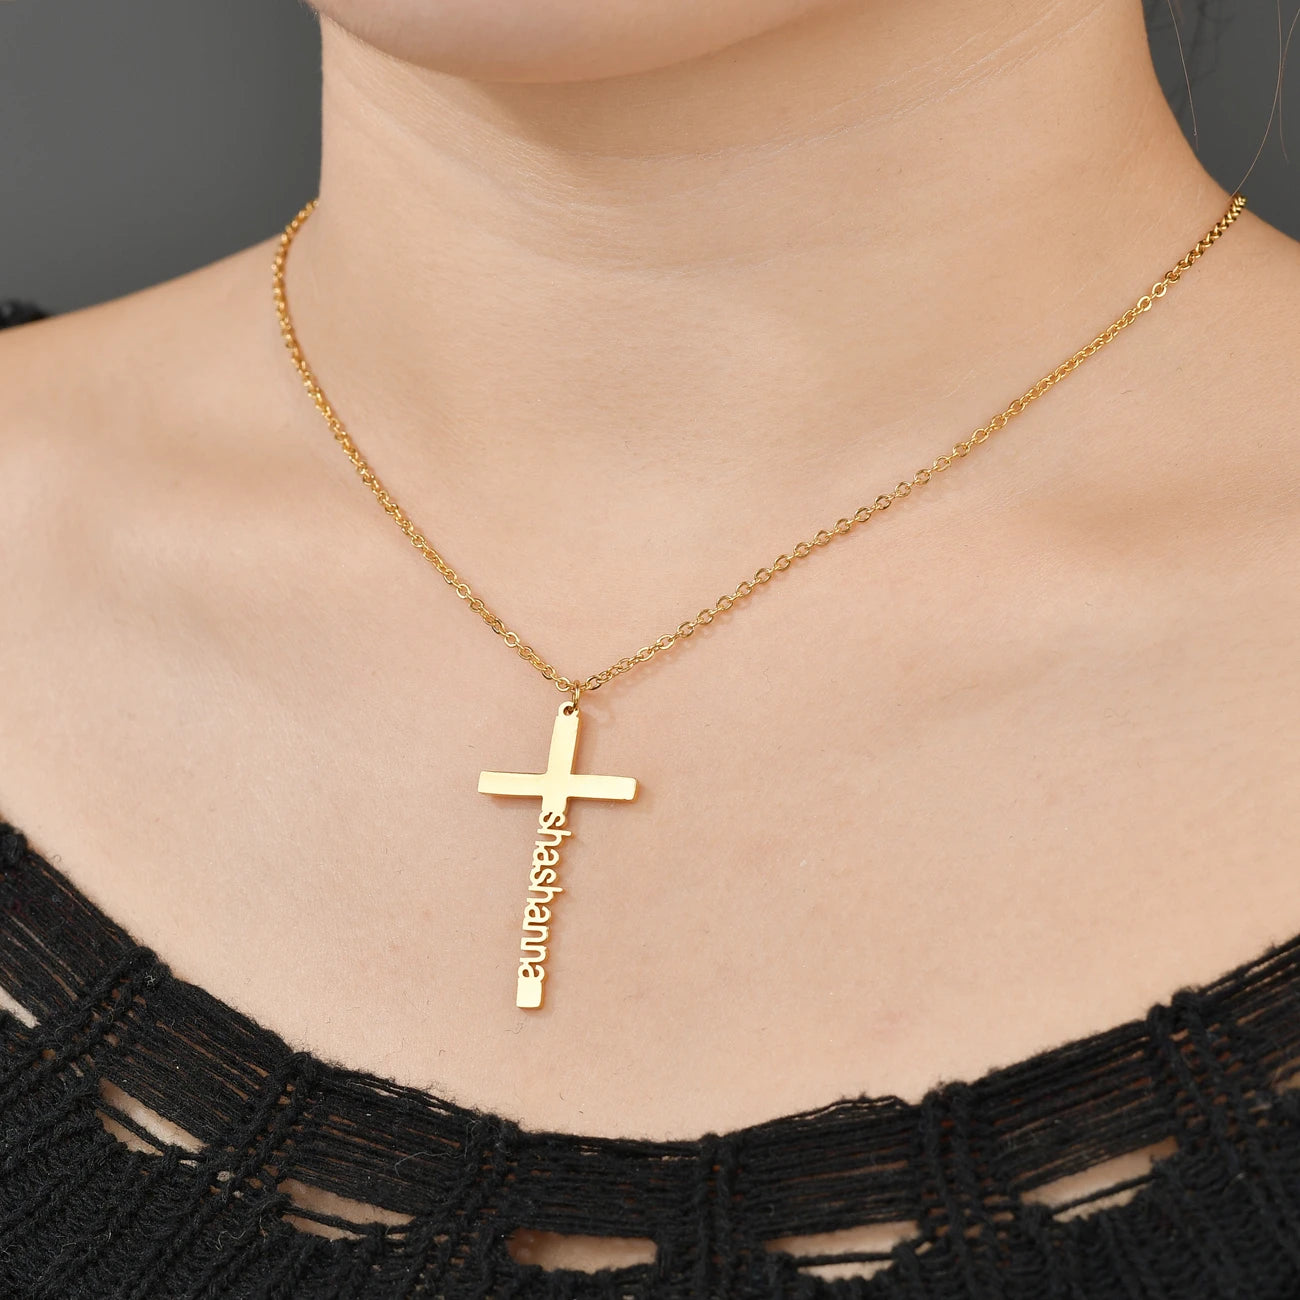 Luxury 18K Gold Plated Personalized Custom Name Cross Pendant Necklace